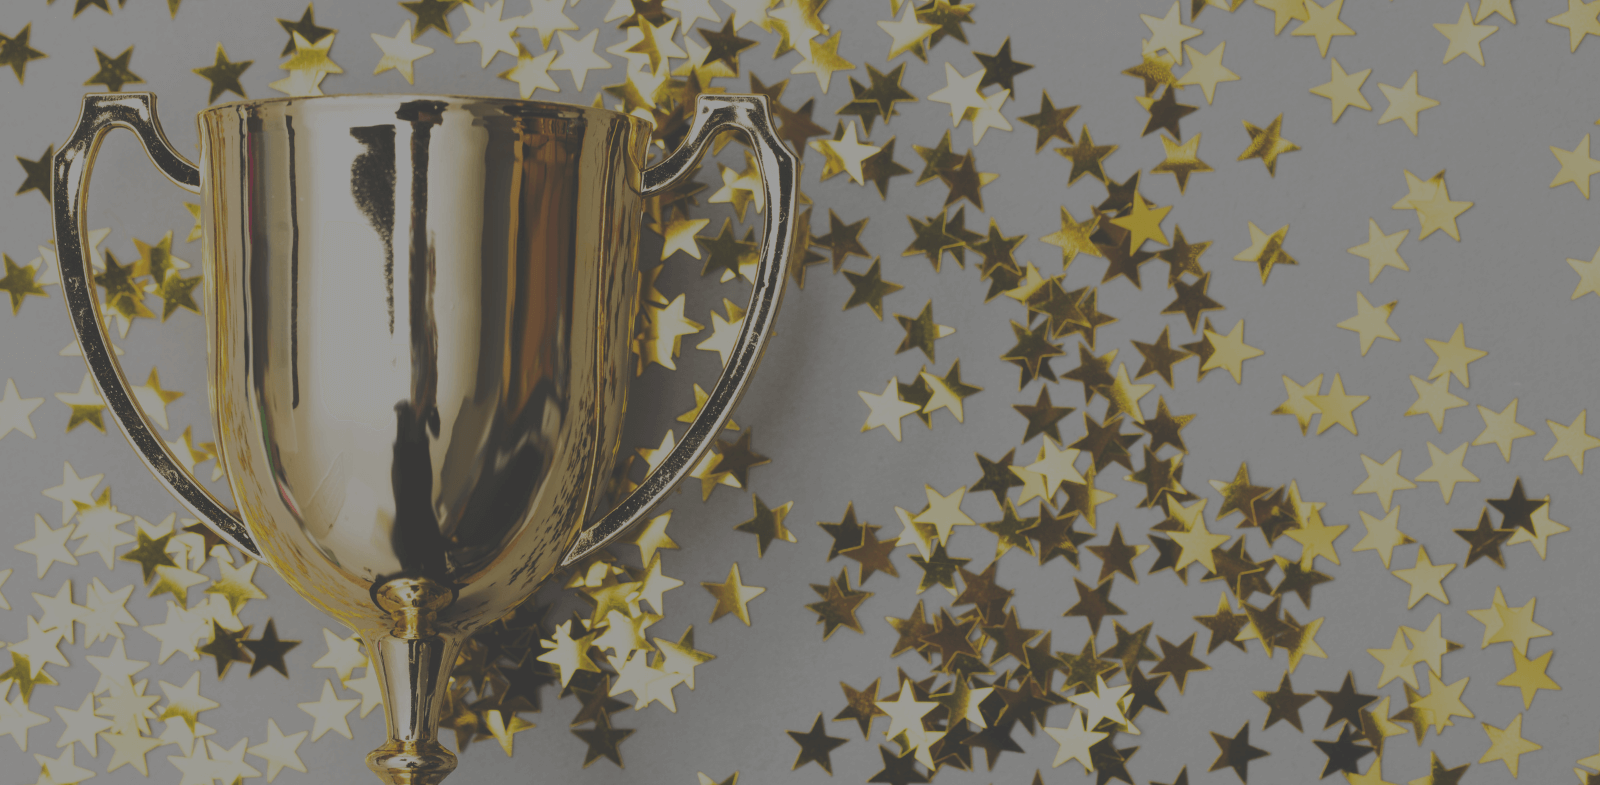 gold winners trophy with gold stars